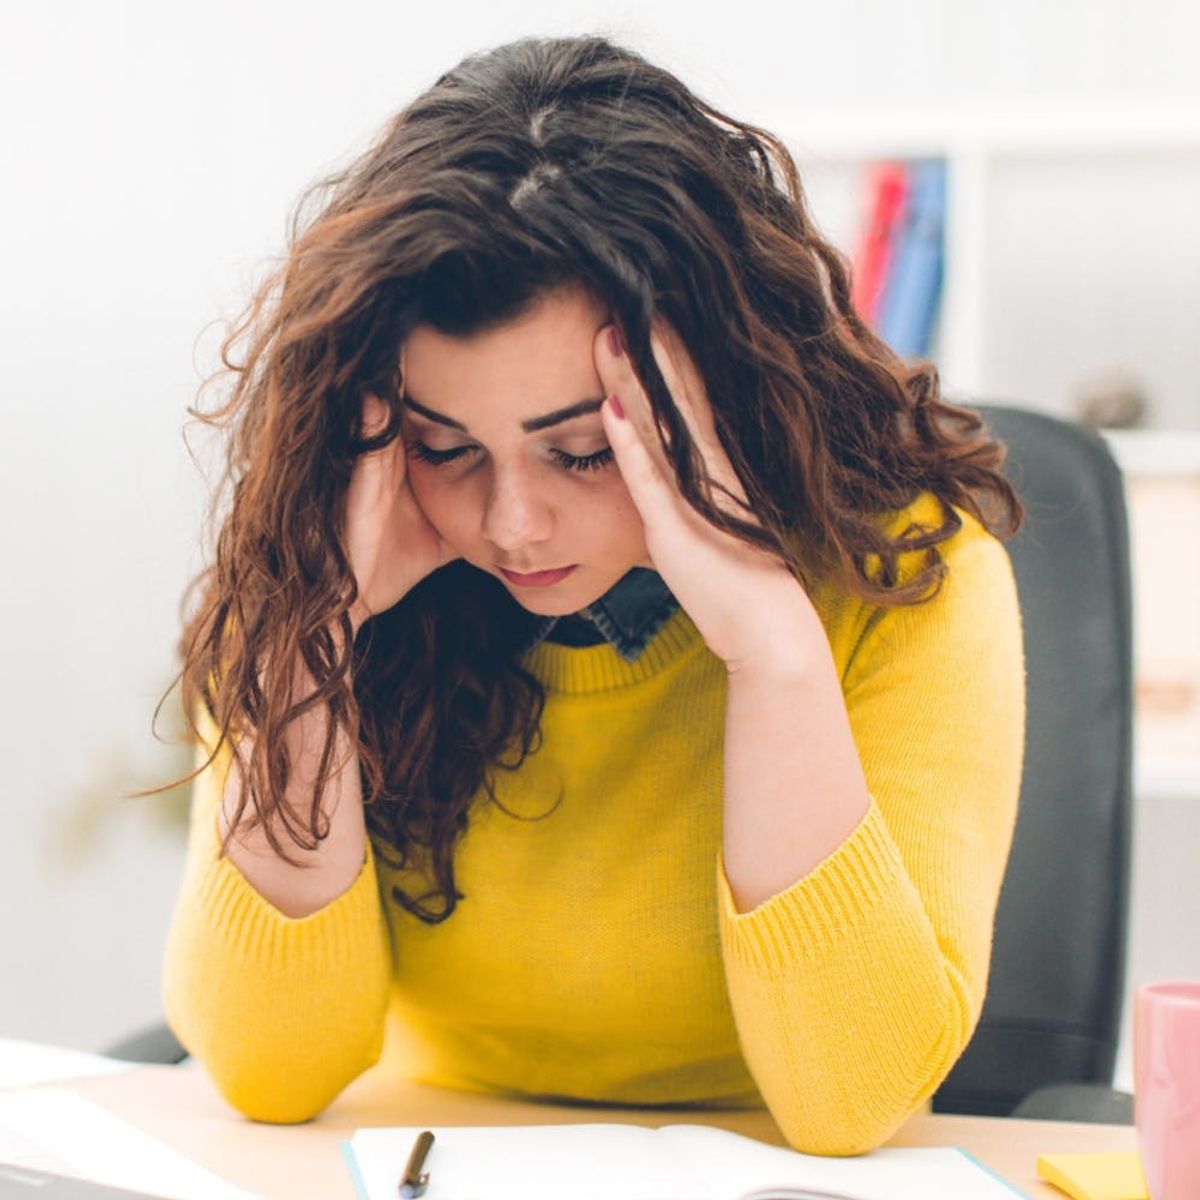 Why Millennial Women Tend to Experience More Career Burnout